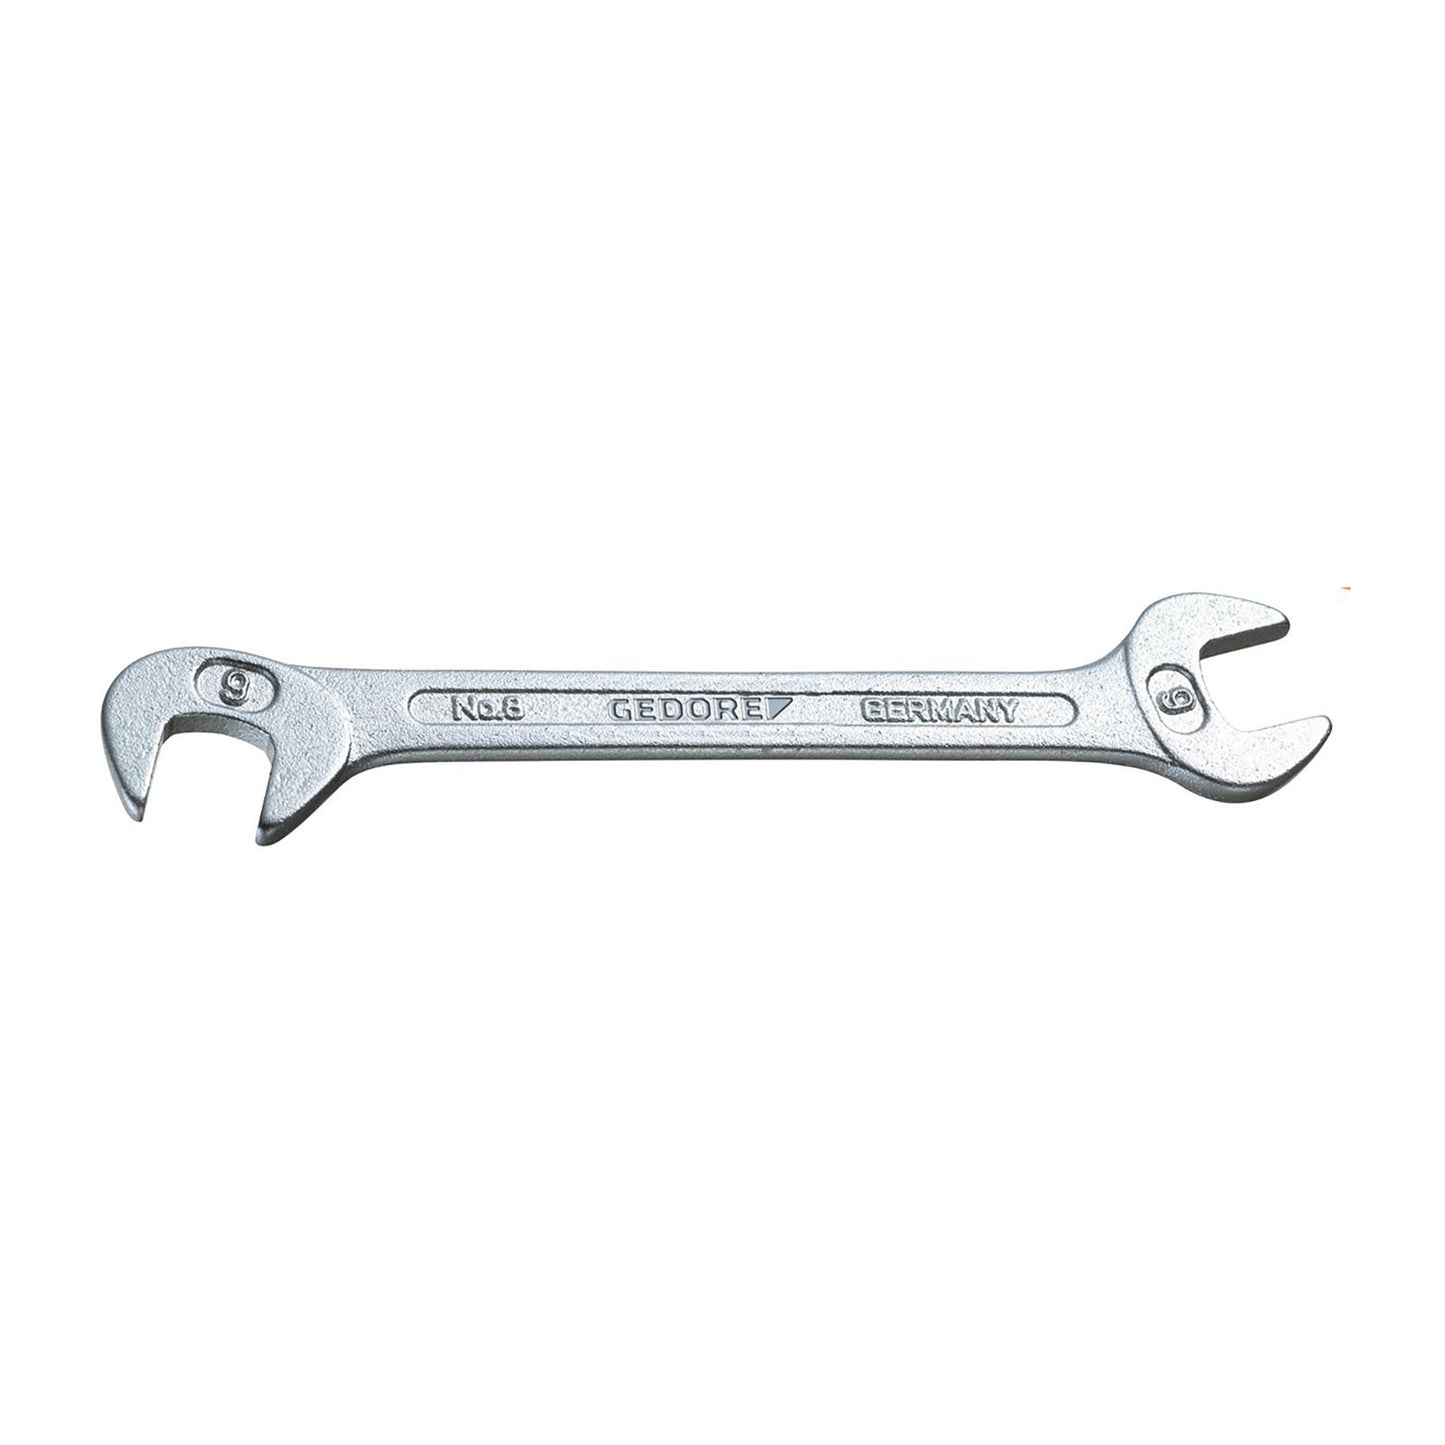 GEDORE 8 9 - Small Fixed Wrench, 9mm (6094630)